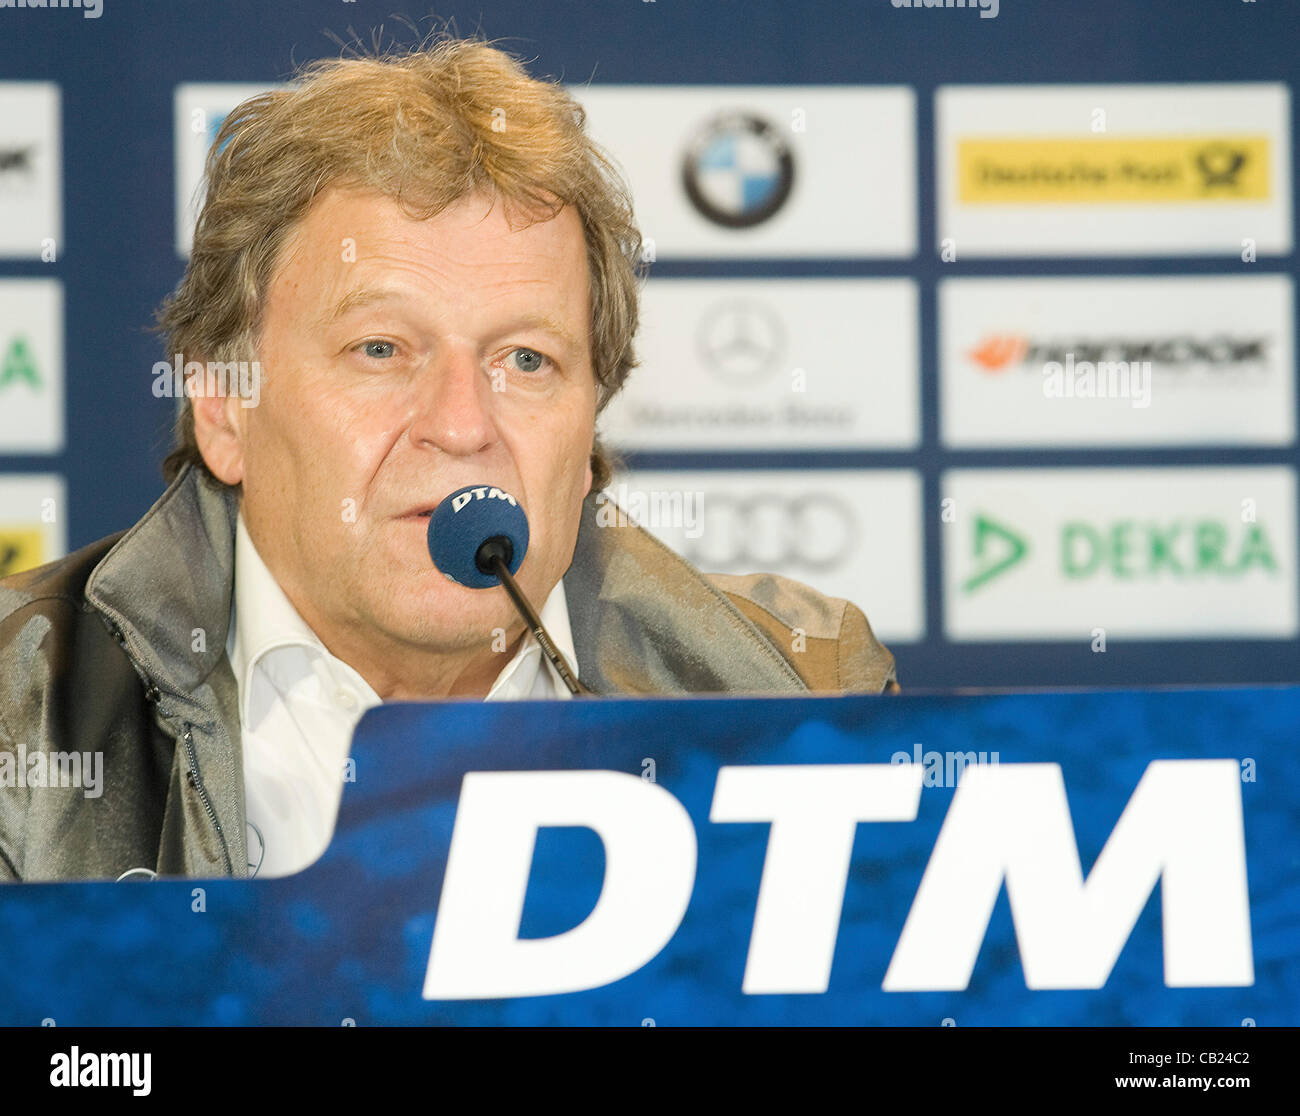 19.05.2012 DTM round 3, Brands Hatch, Mercedes Team Principal Norbert Haug in the post qualifying press conference after securing the front row of the grid for Sunday's Race in the 2012 DTM Championship, Kent, England Stock Photo